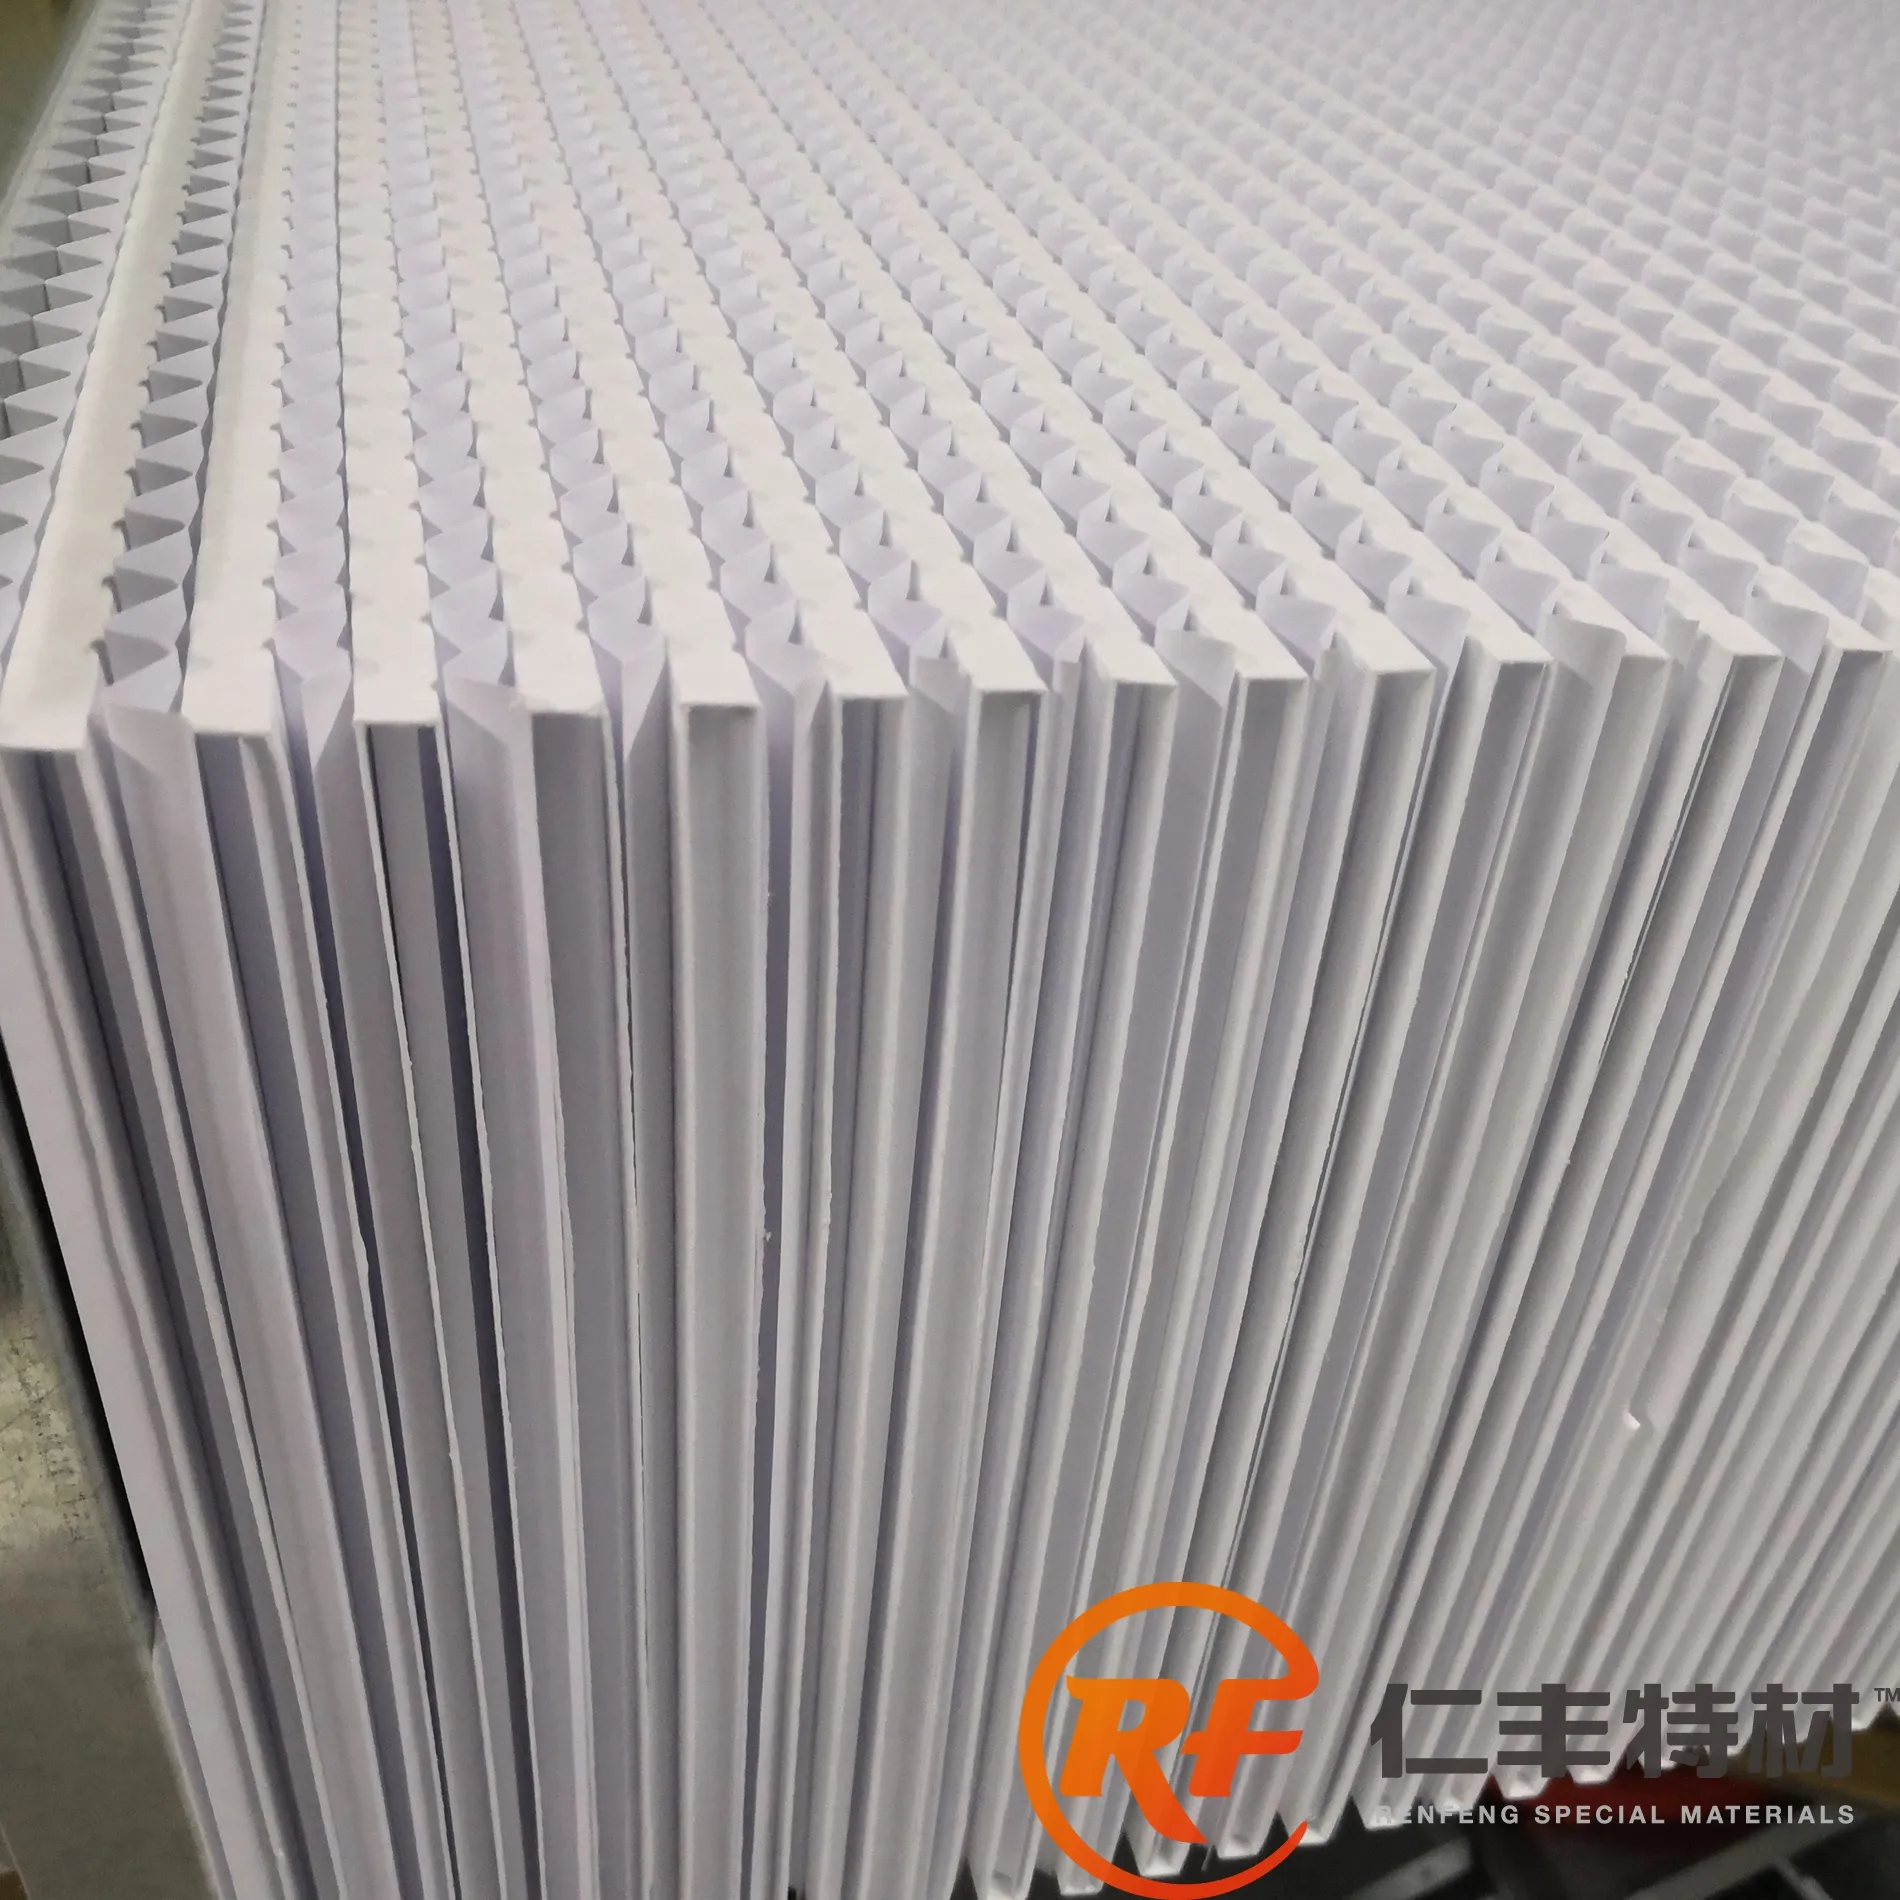 High quality good efficiency performance air filter glassfiber air filter paper